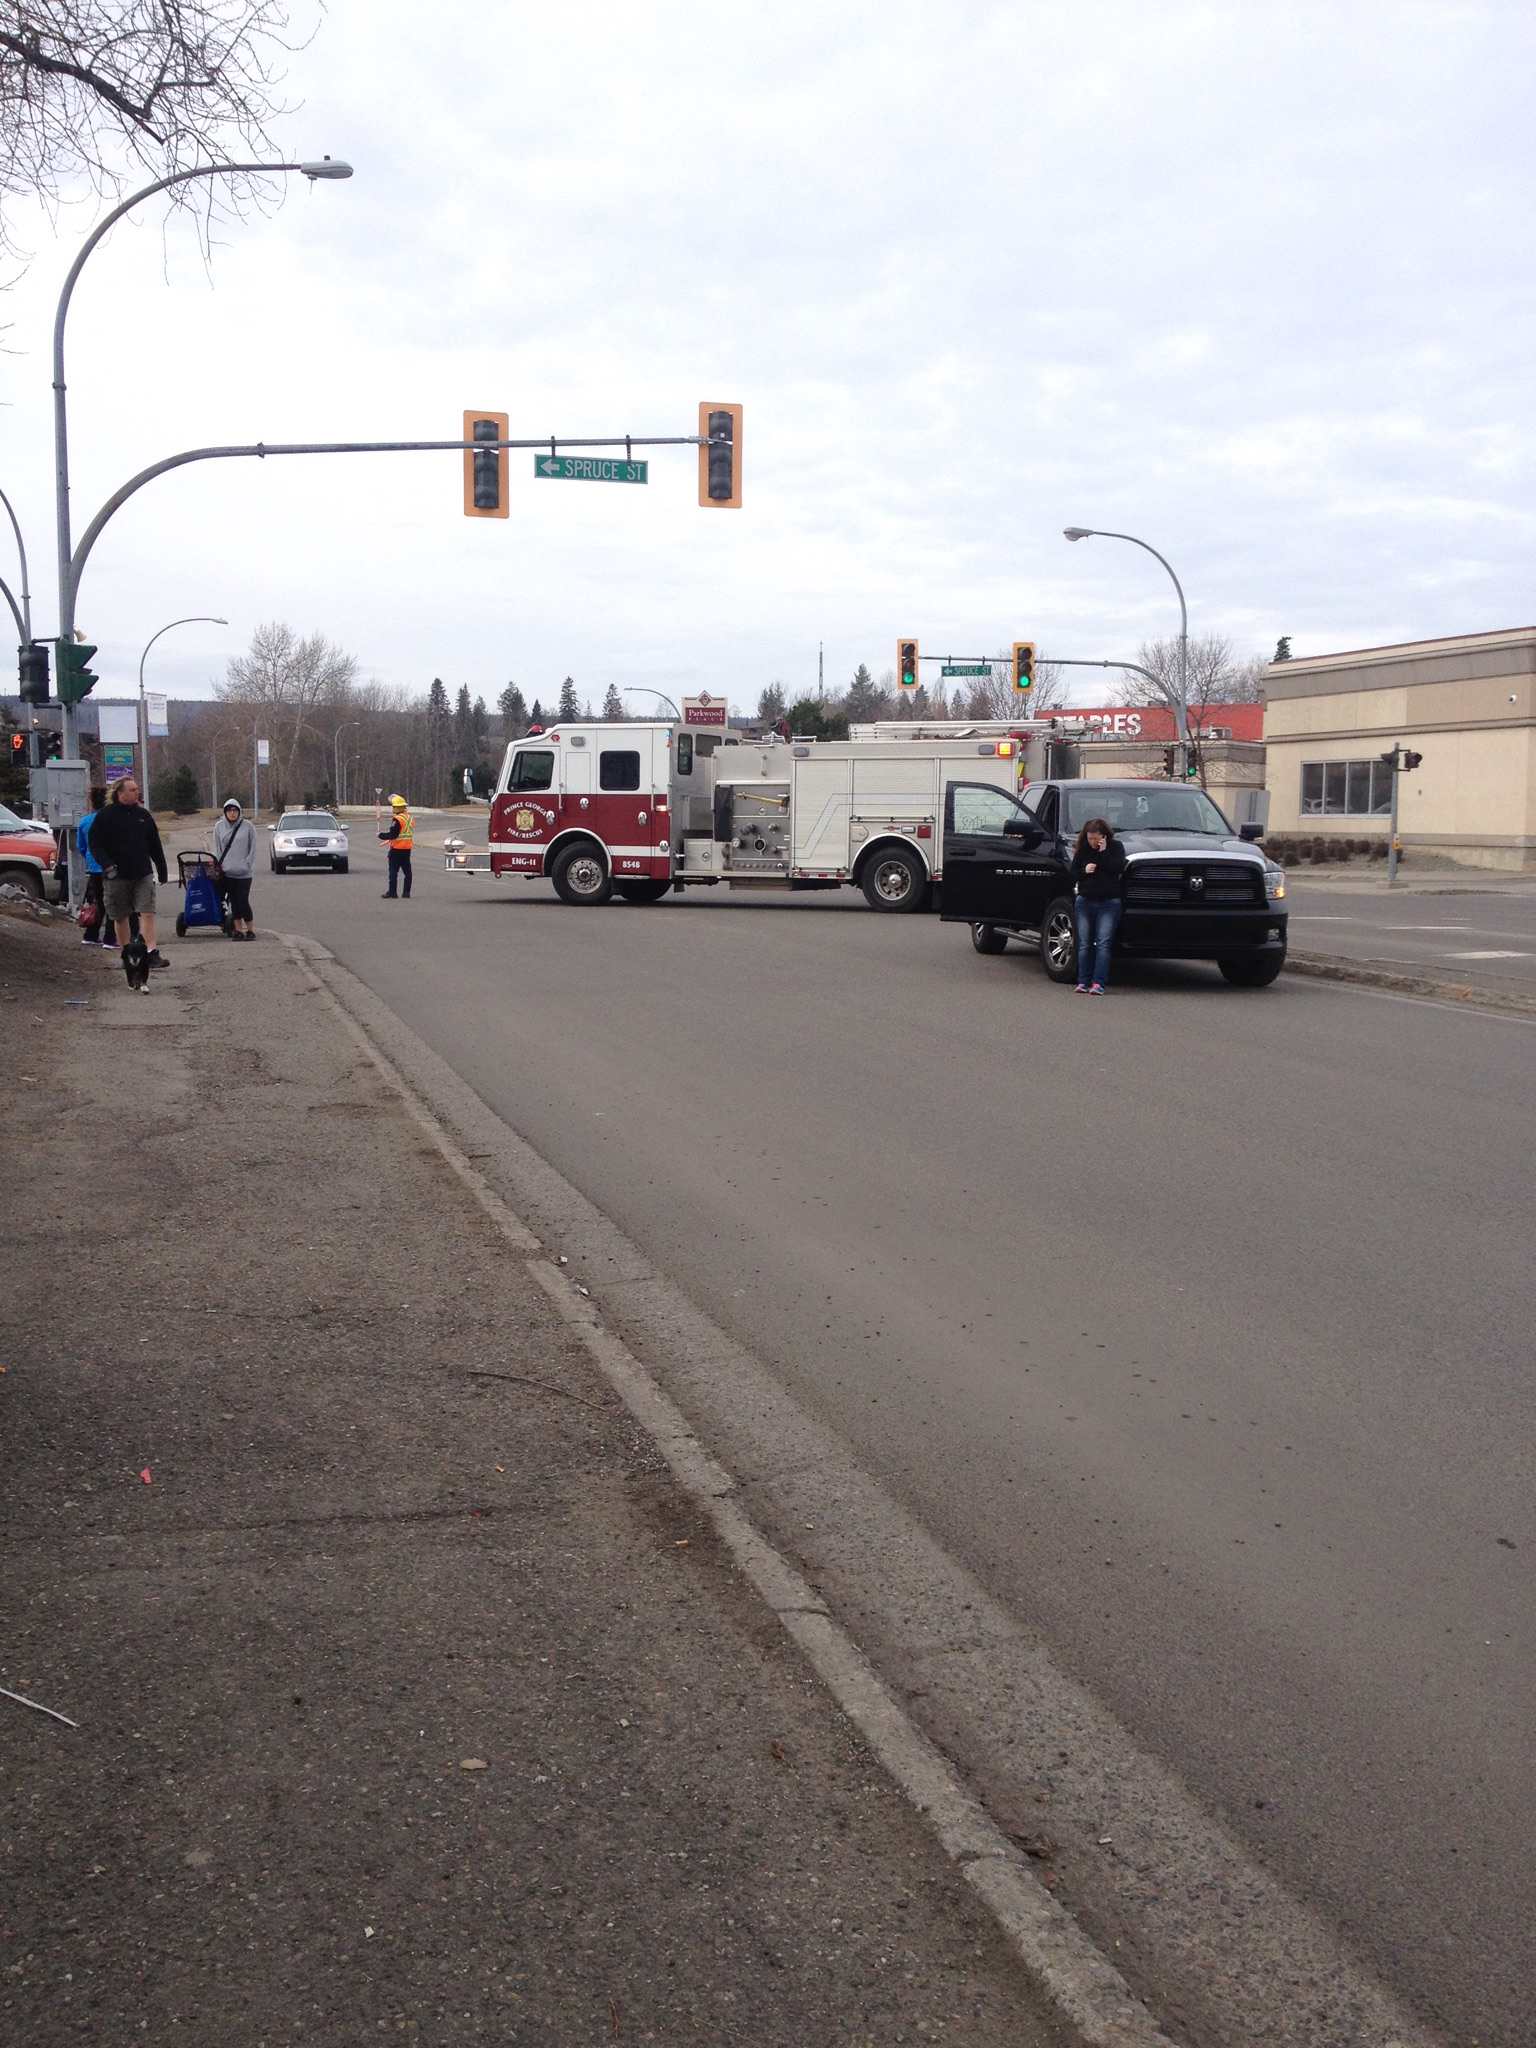 Vehicle collides with pedestrian at Spruce St. and 15th Ave